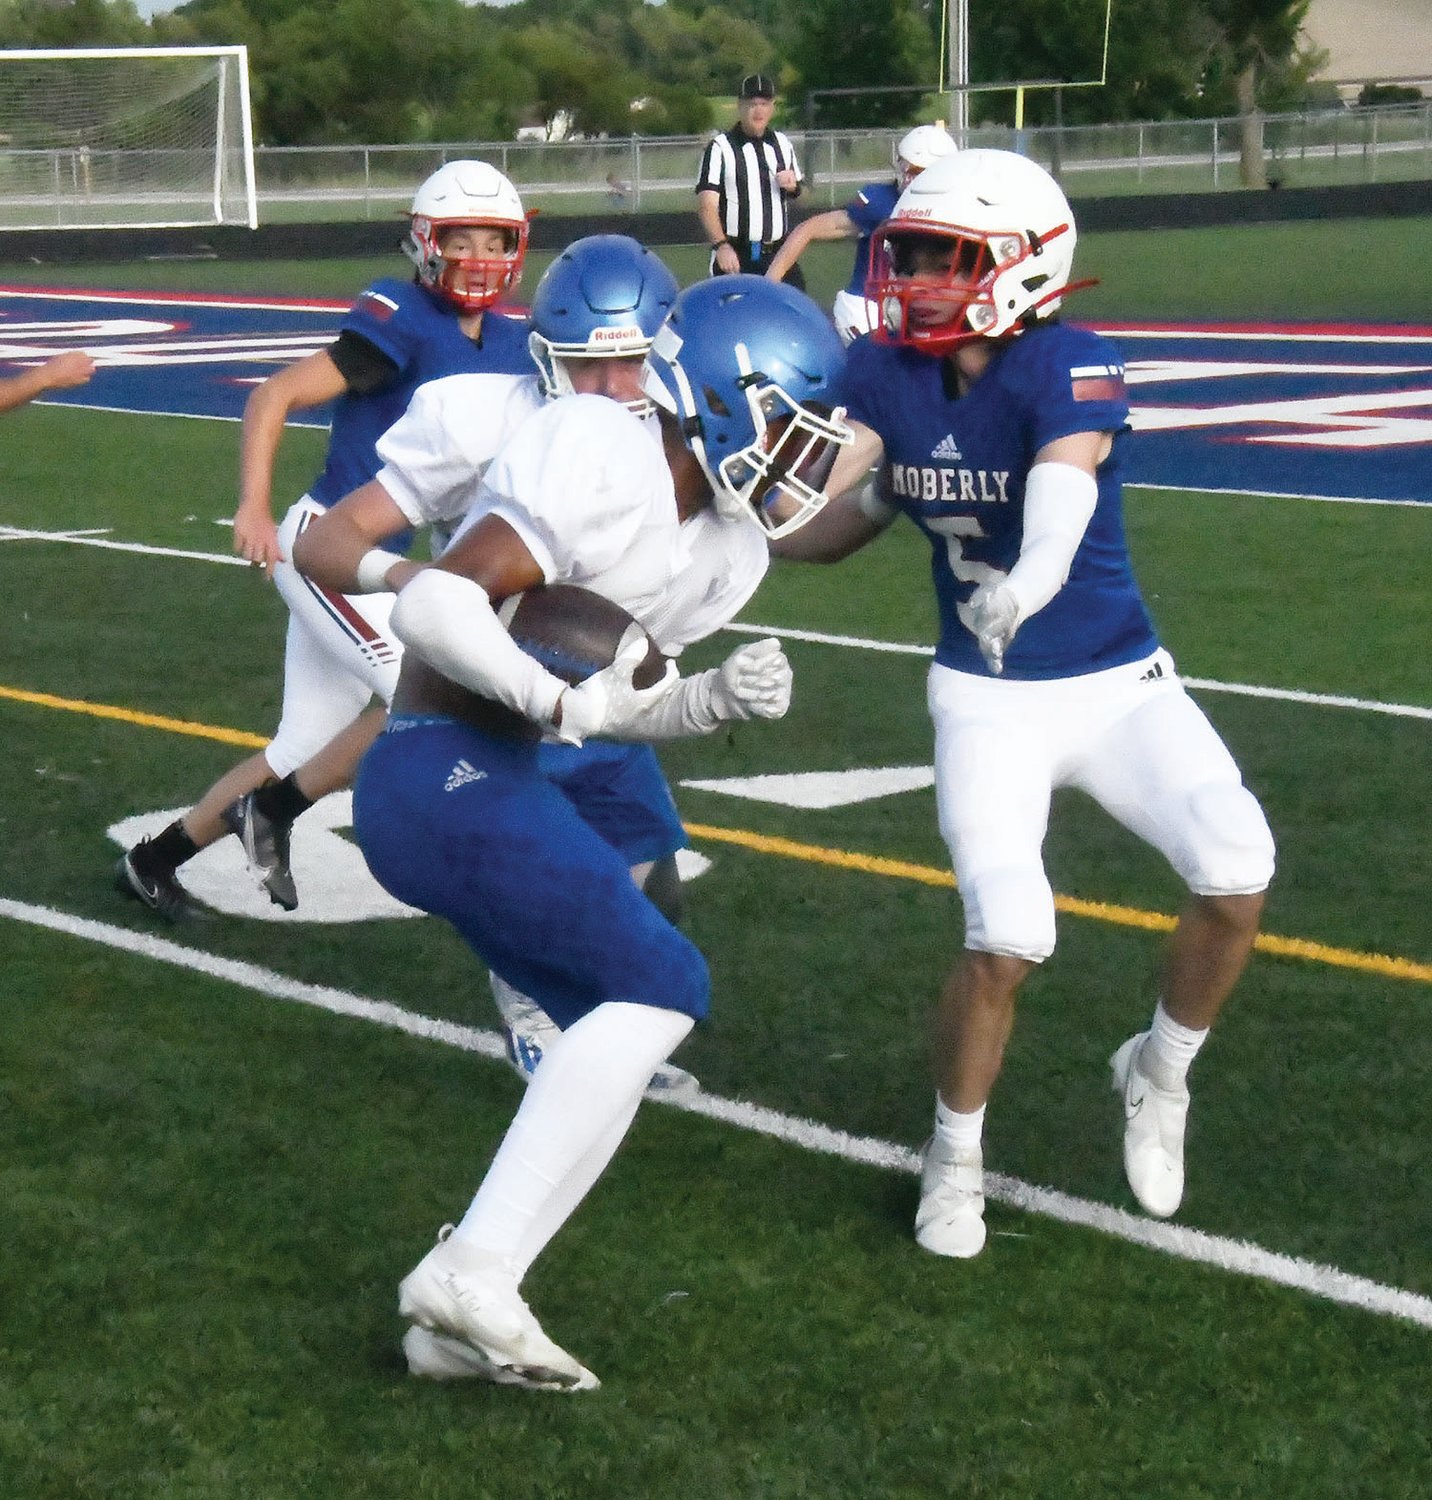 Moberly defender Brett Gelina prepares to tackle a player from Boonville.